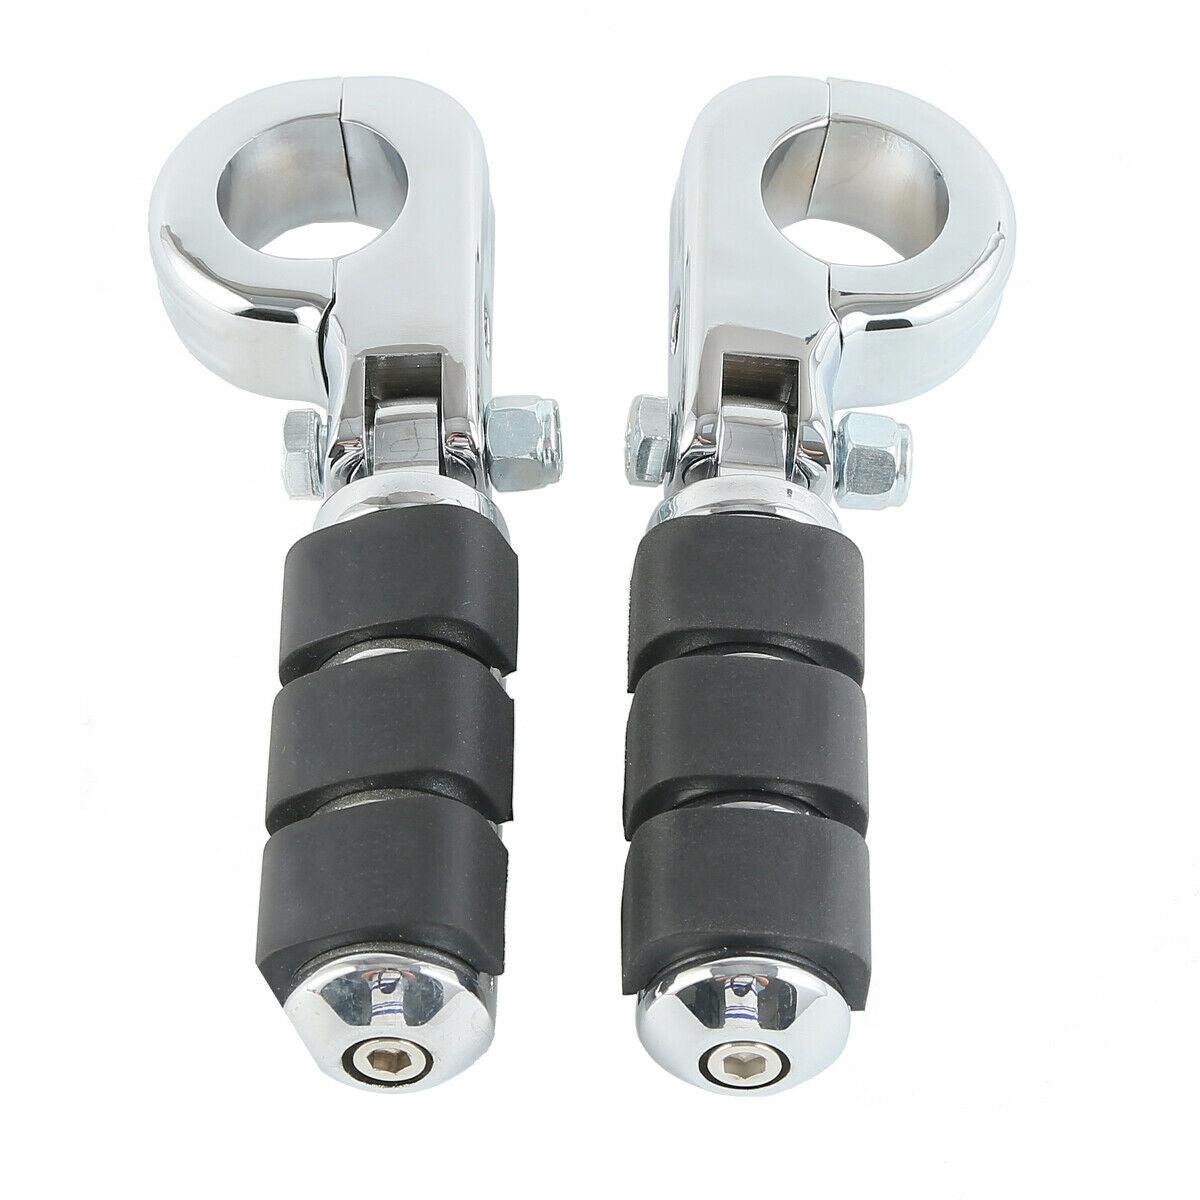 1.25" 1-1/4" Engine Guards Highway FootPegs Mount Fit For Harley Sportster XL - Moto Life Products